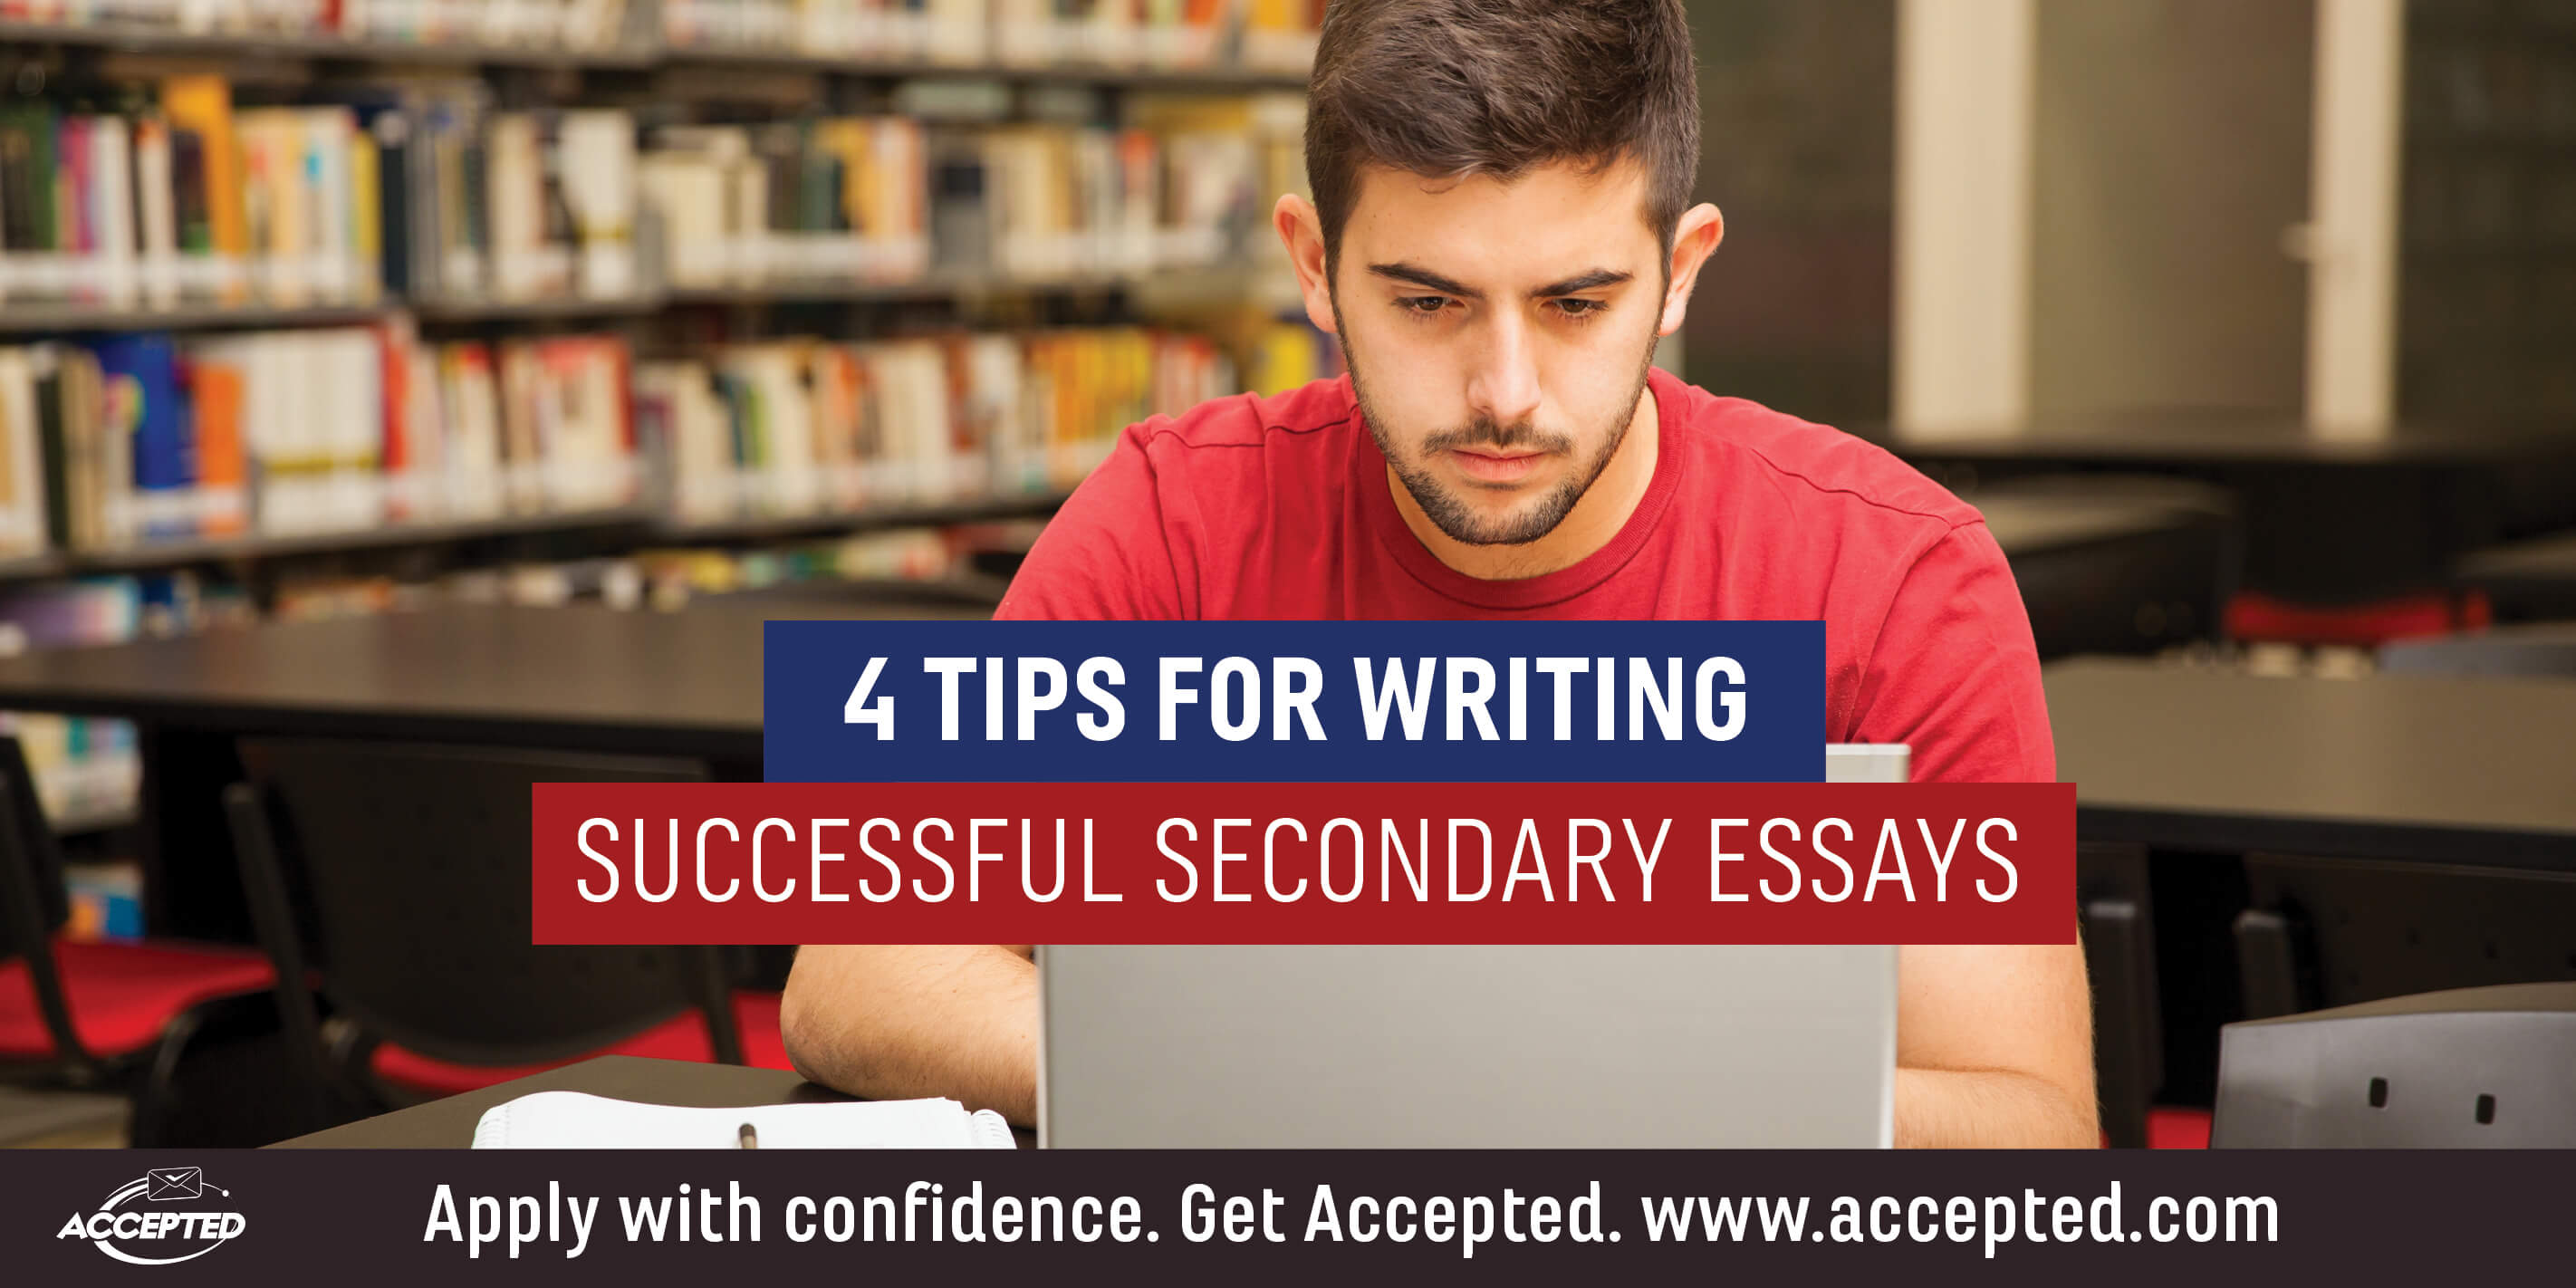 Successful writing. Tips for successful writing. Get accepted to University.